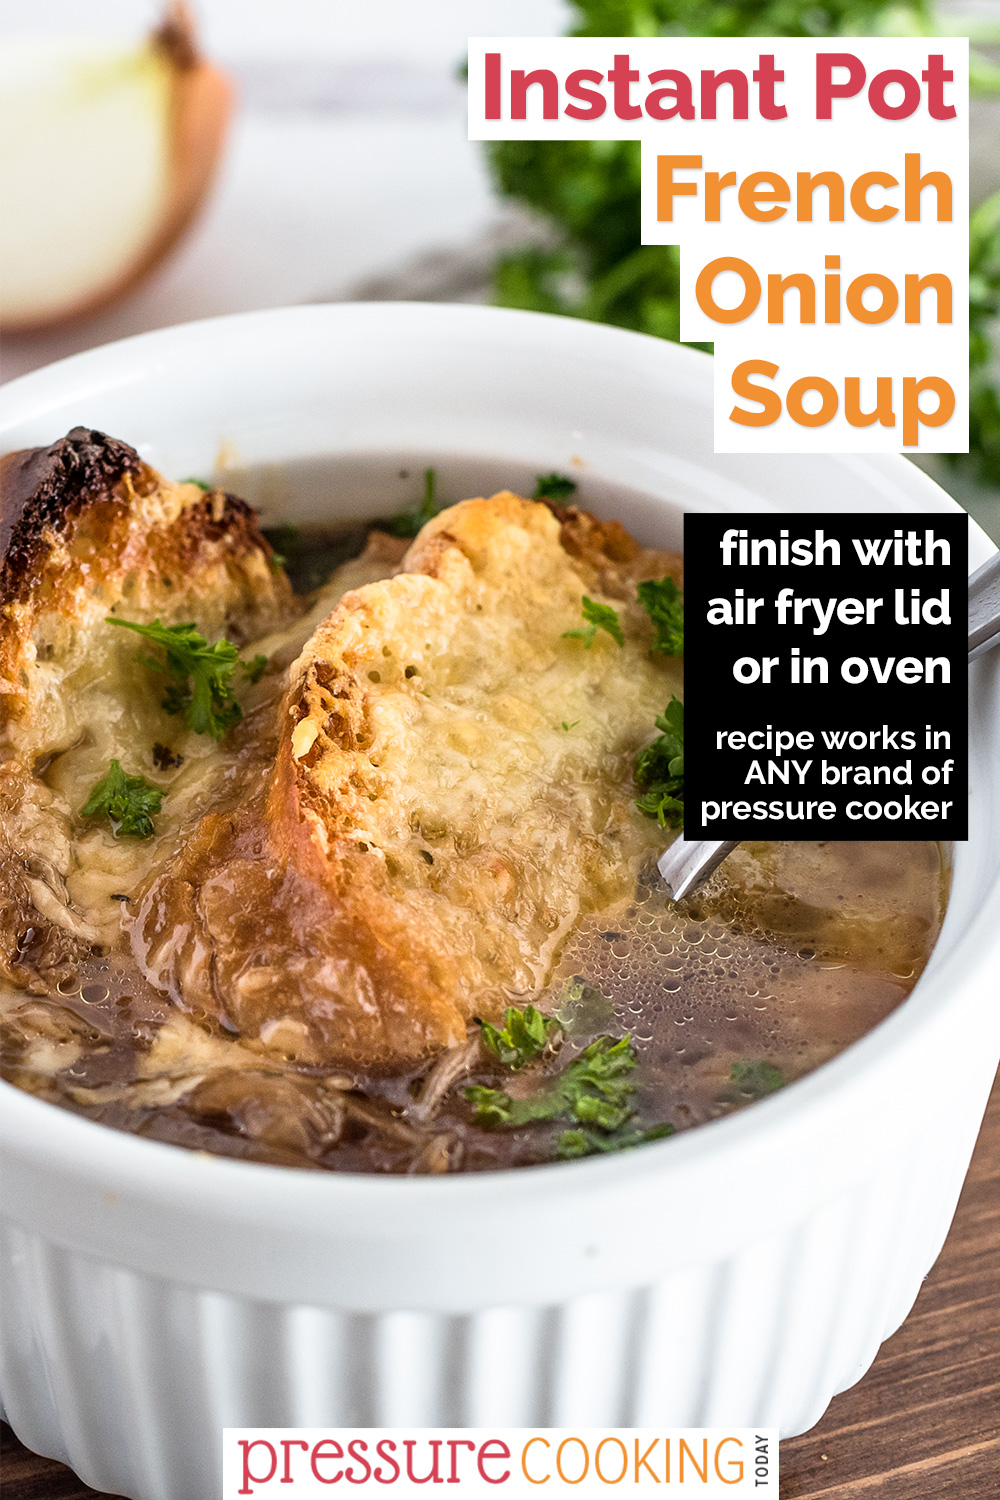 Pinterest Image that reads "Instant Pot French Onion Soup: Finish with air fryer lid or in oven" in a right-aligned black text box overlaid on a close-up vertical image of French Onion Soup with crusty browned baguettes and melted cheese in a white ramekin via @PressureCook2da